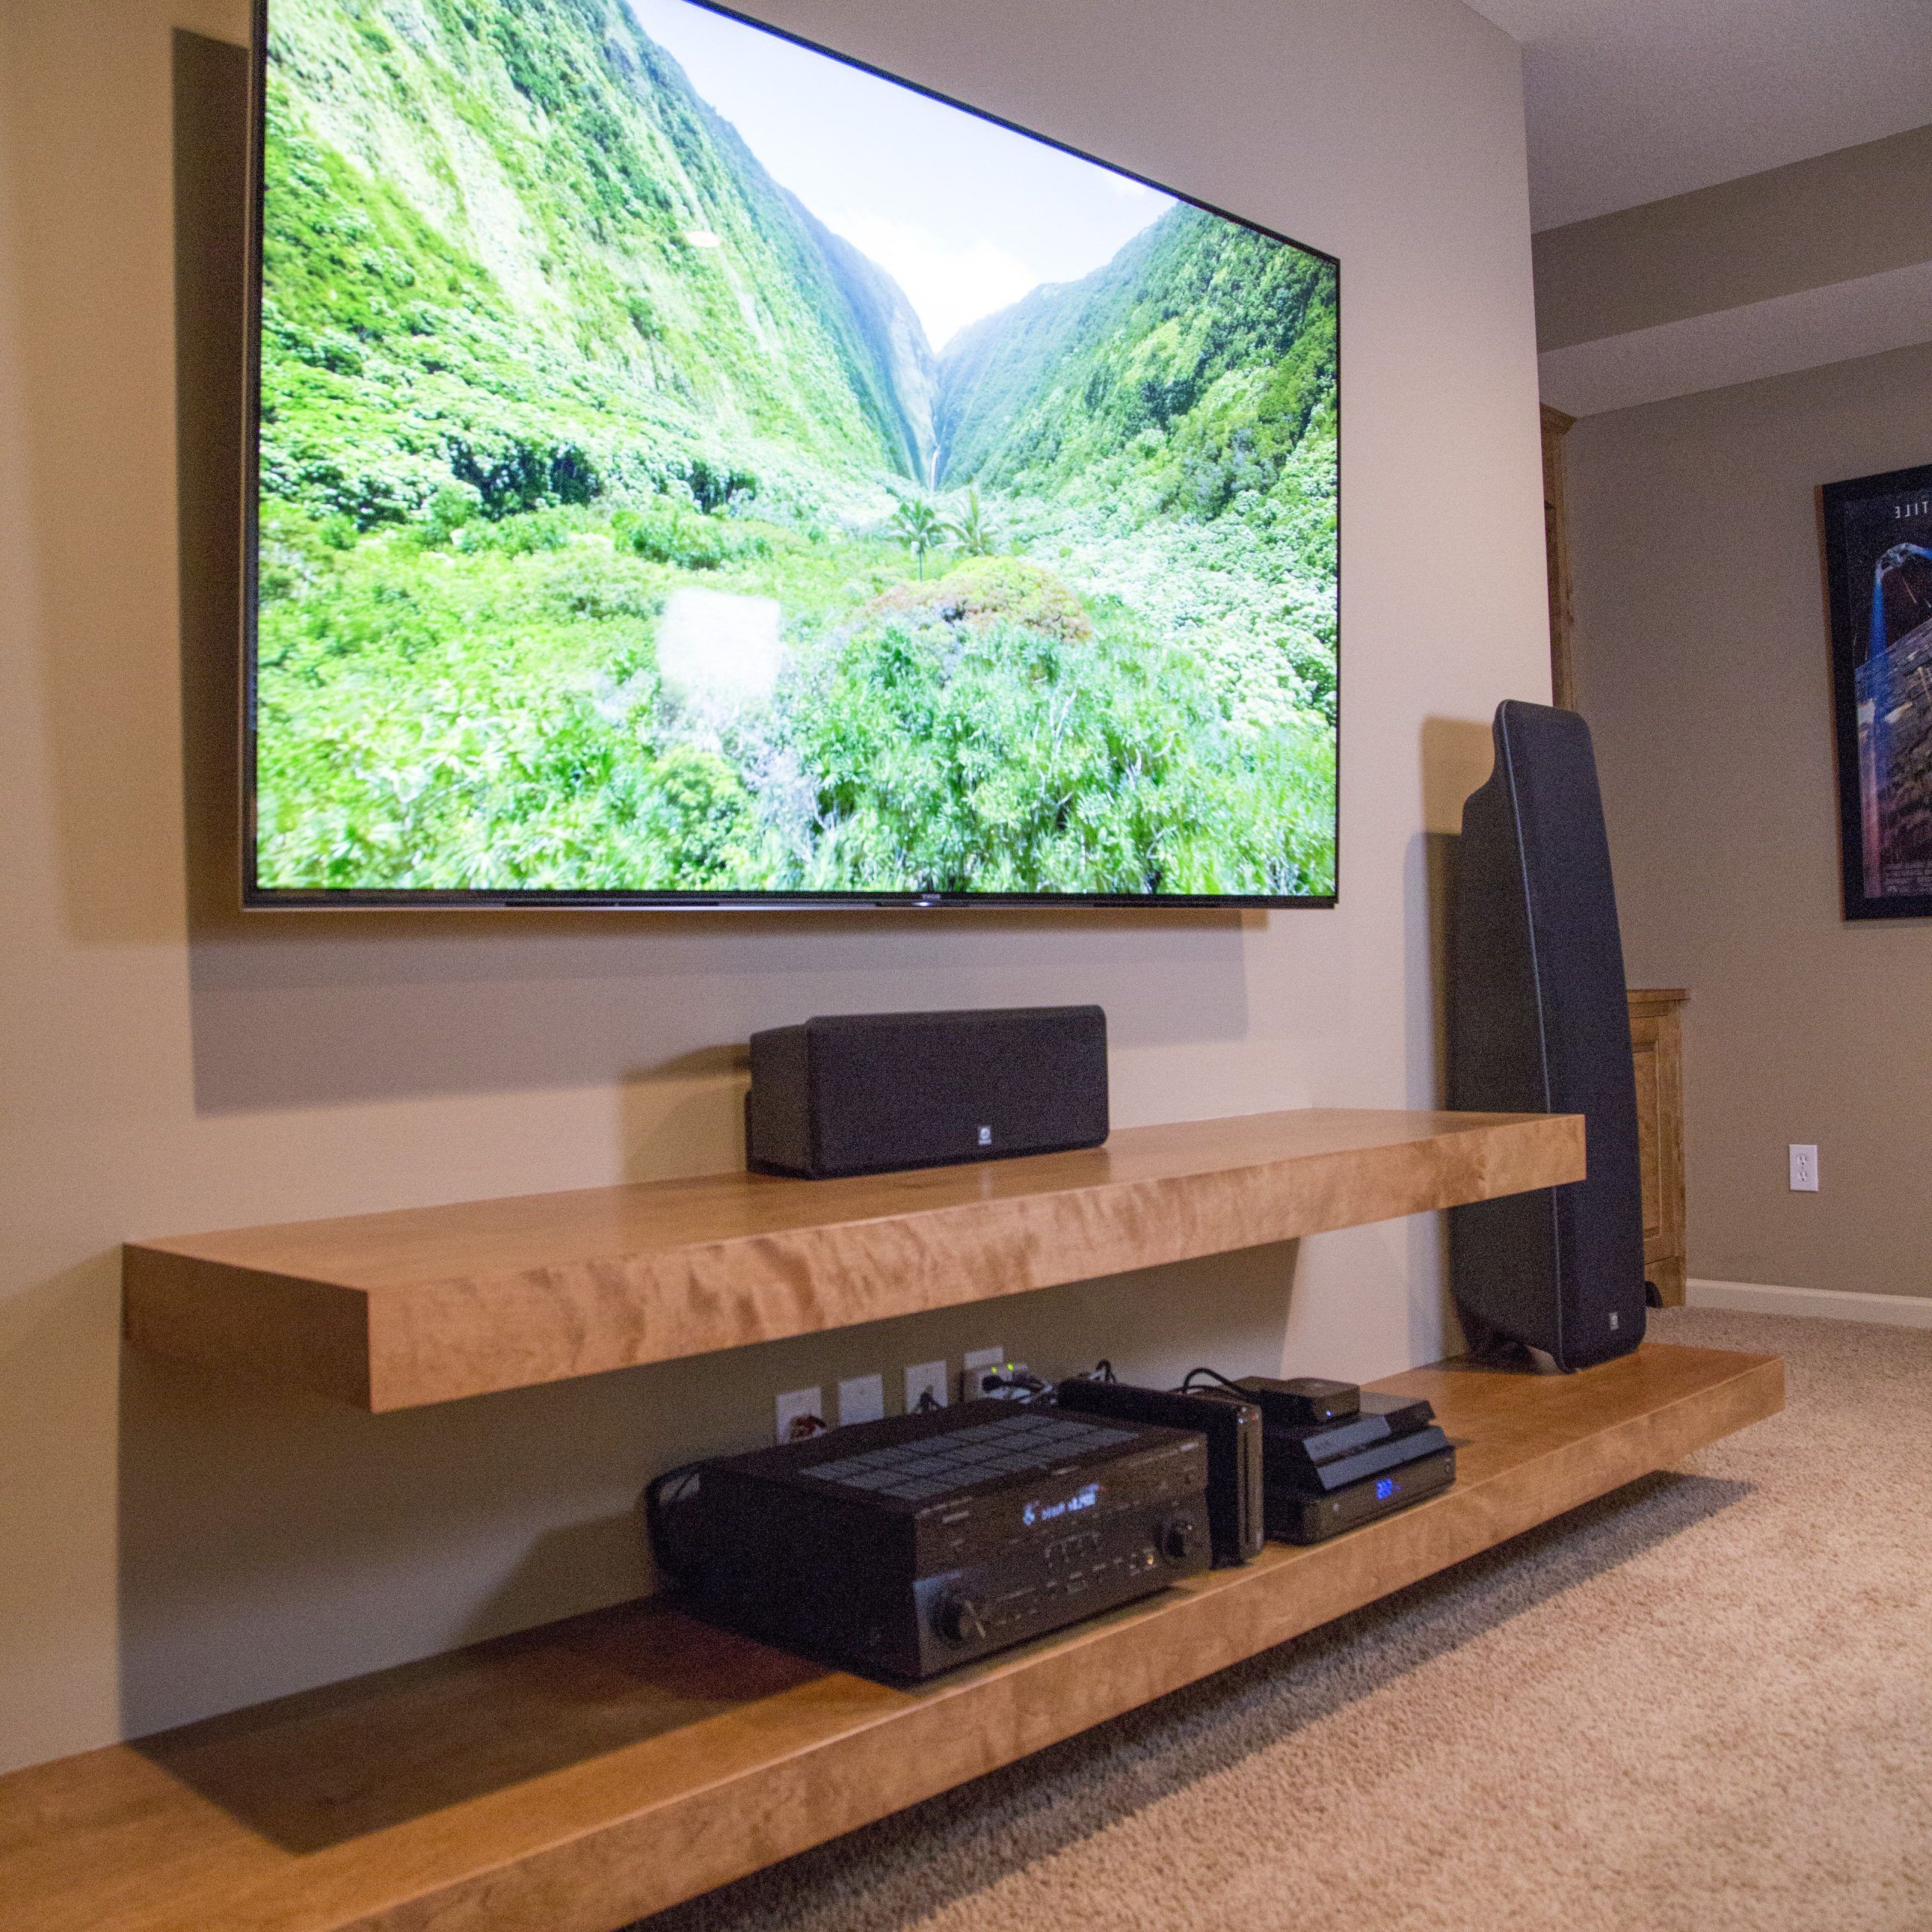 Floating Shelves Entertainment Center | Floating Shelves Living Room,  Living Room Tv Wall, Living Room Decor Throughout Floating Stands For Tvs (View 10 of 20)